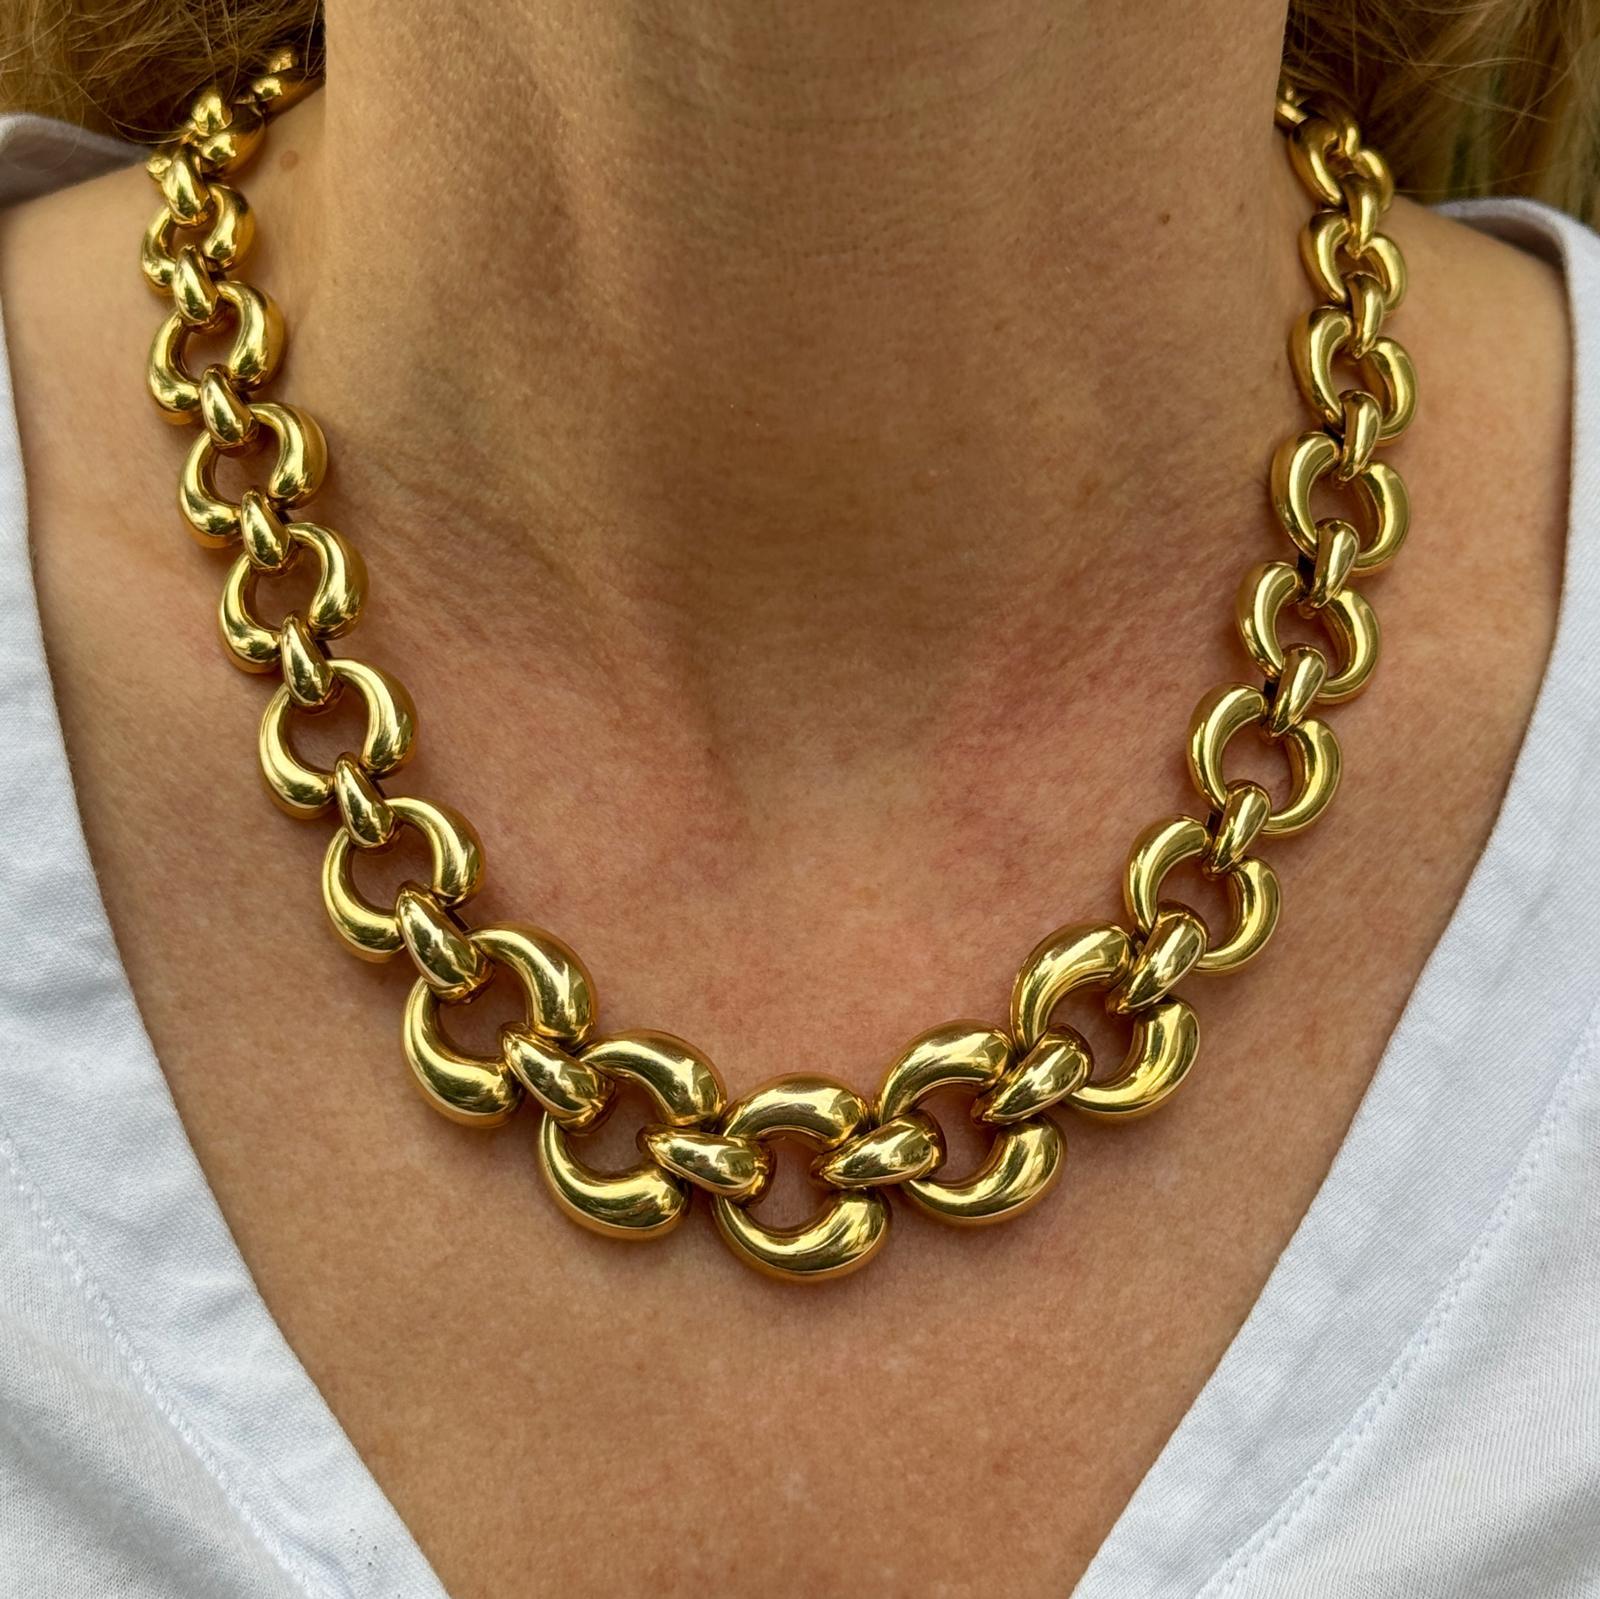 Modern Italian graduated link necklace crafted in 14 karat yellow gold. The necklace measures 17.75 inches in length and .50- .75 inches in width. Weight: 57.1 grams.